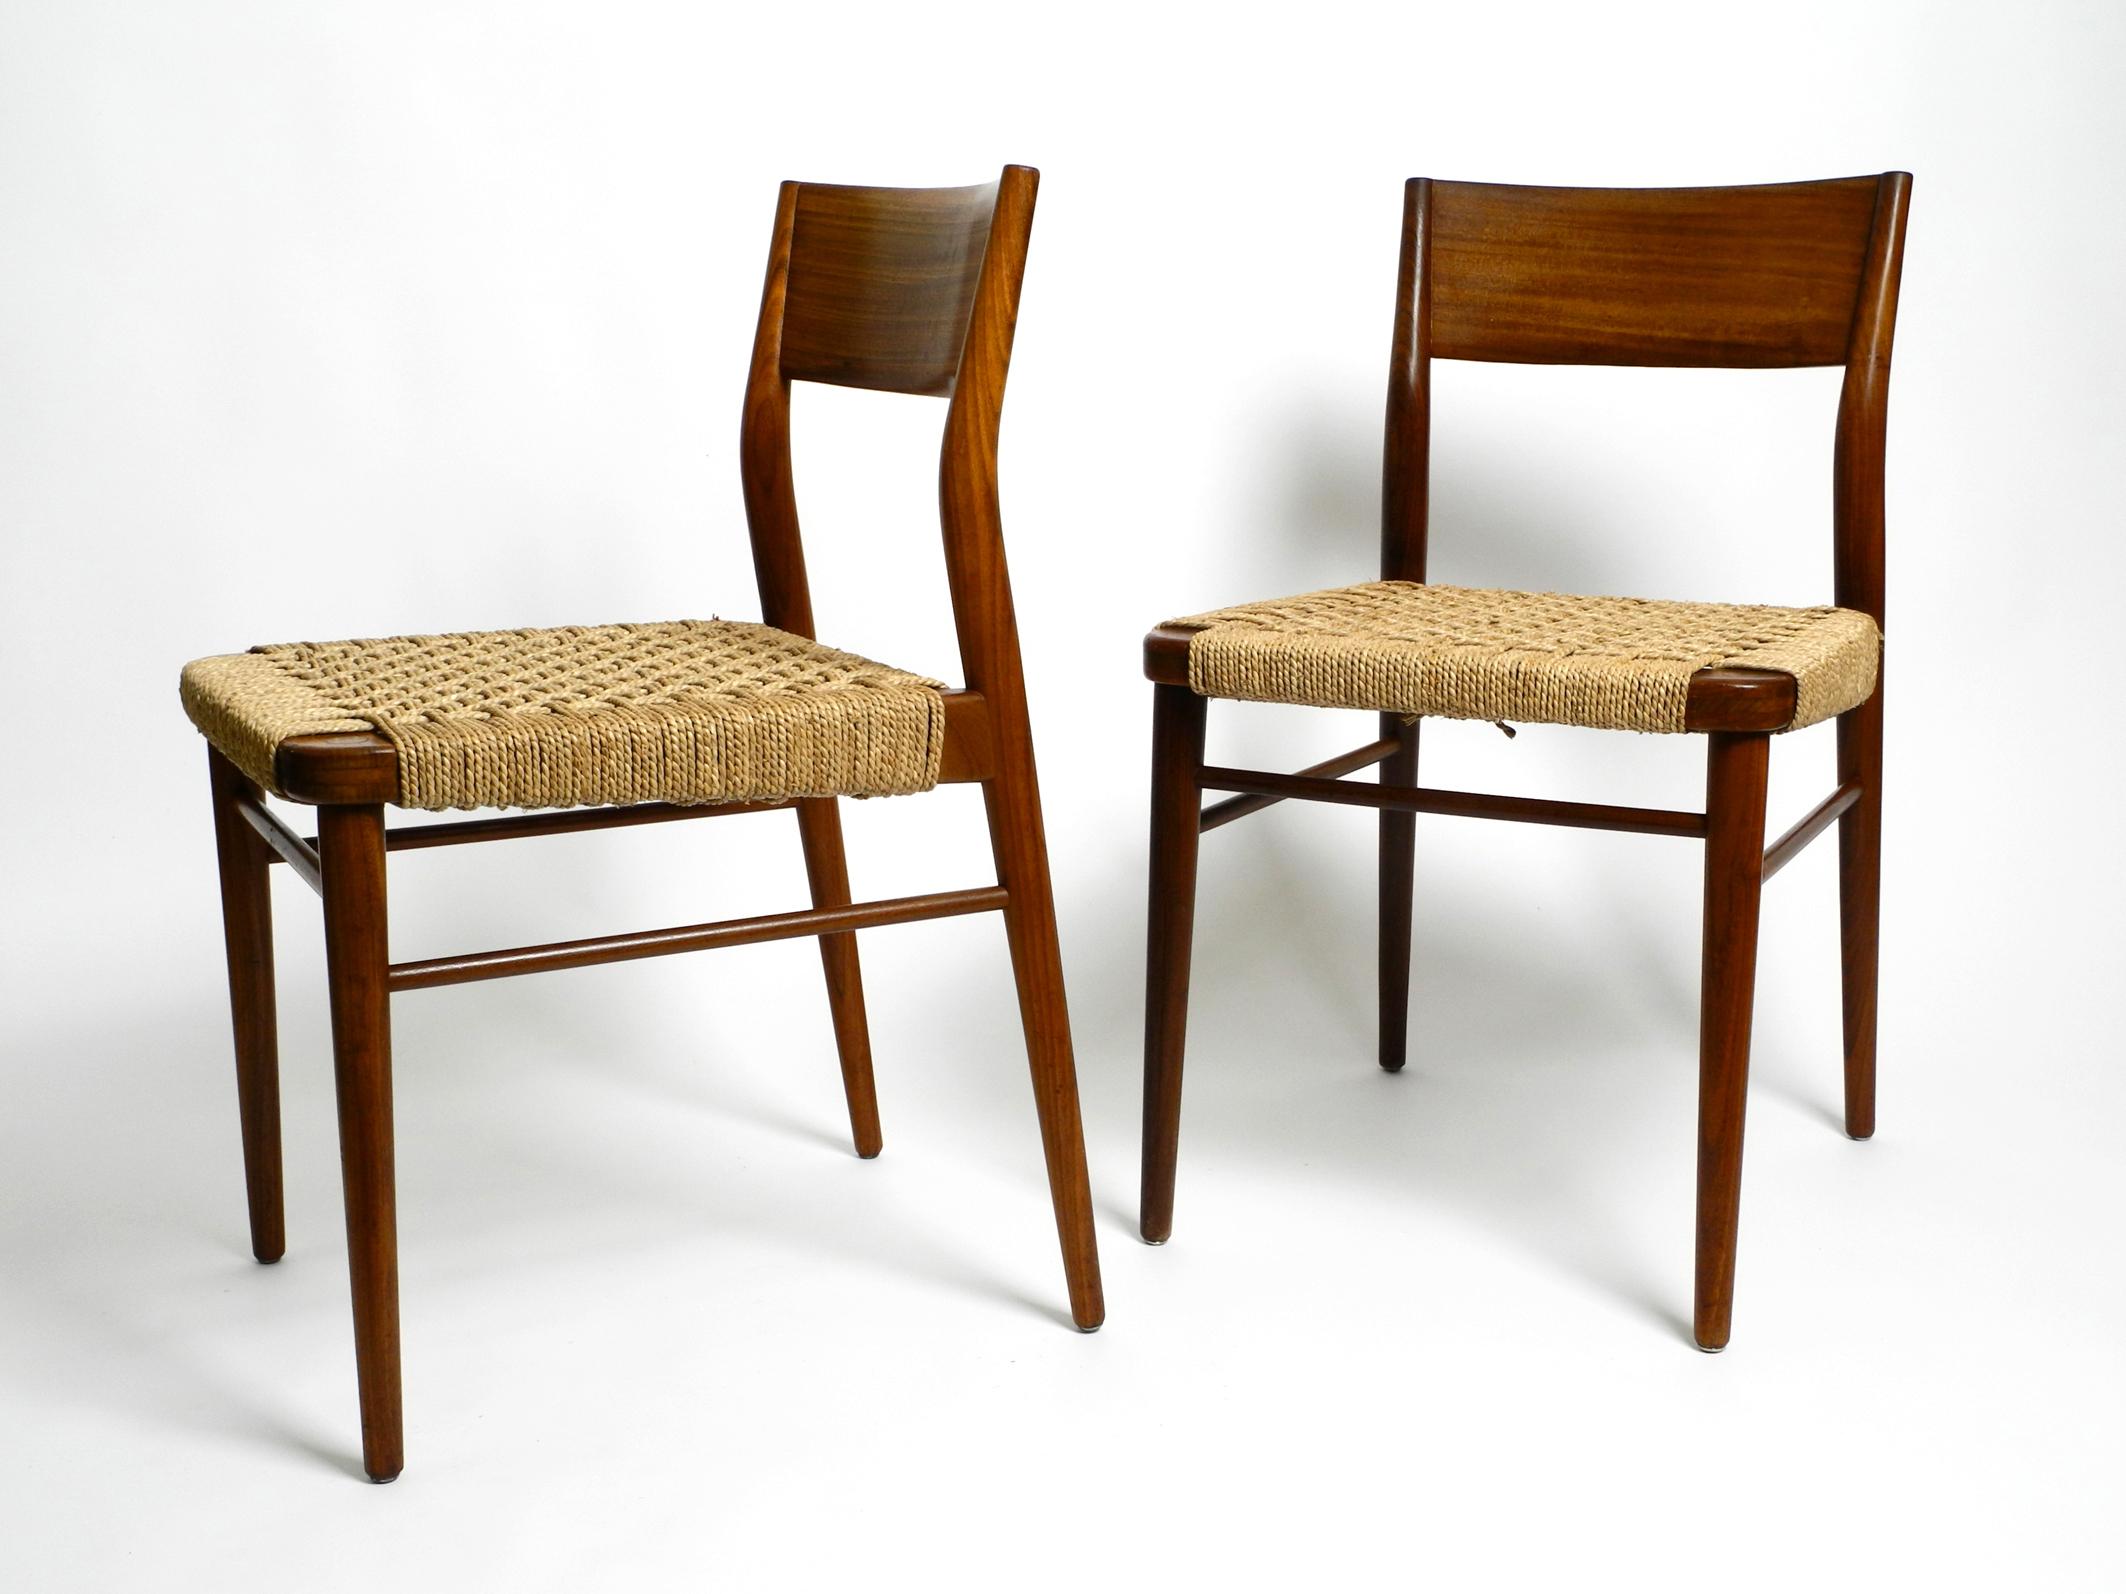 Two original 1960s dining chairs made by walnut wood and woven rush cord seats.
Manufactured by Wilkhahn, Modell 351. Designed by Georg Leowald. Made in Germany.
Beautiful minimalist design in very good vintage condition.
Very well preserved with